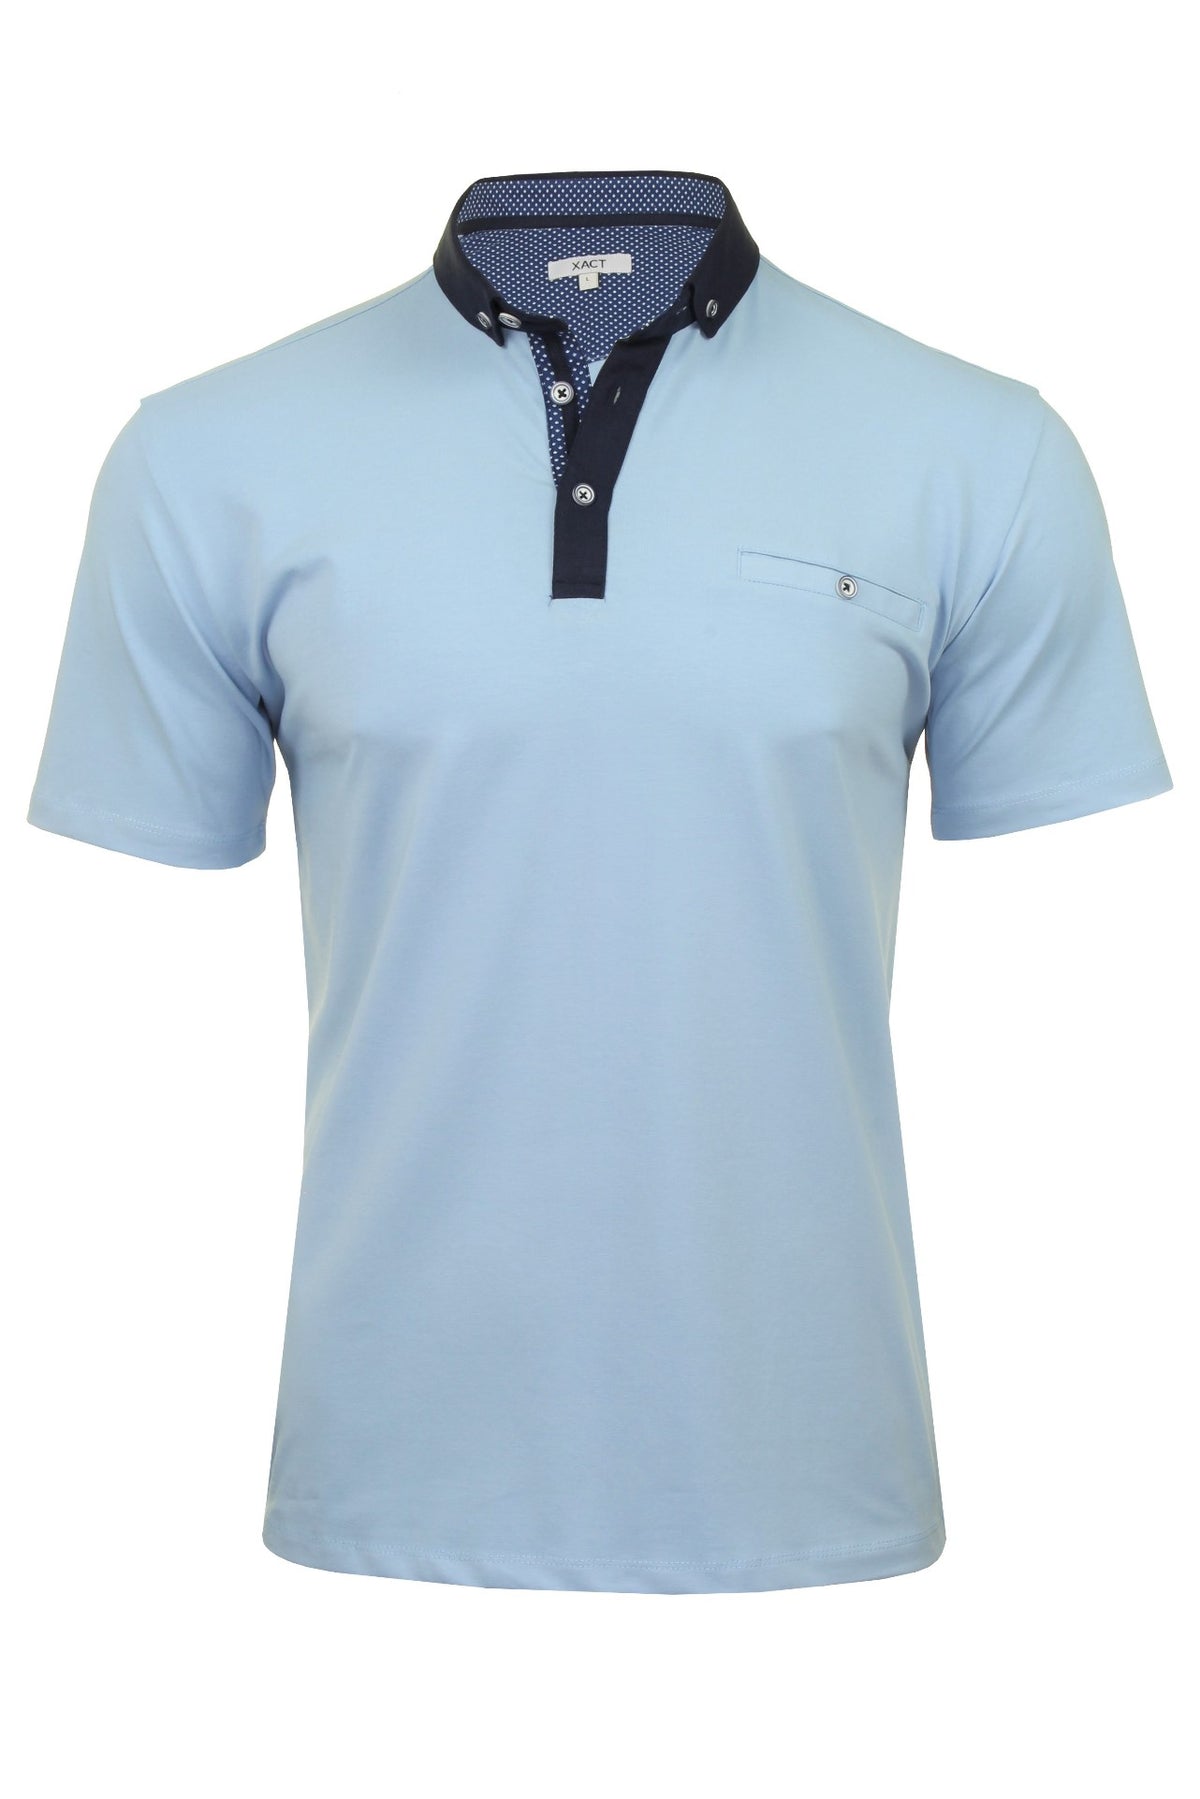 Xact Mens Polo Shirt with Short Sleeves and Button Down Collar, 01, Xp1076, Sky Blue